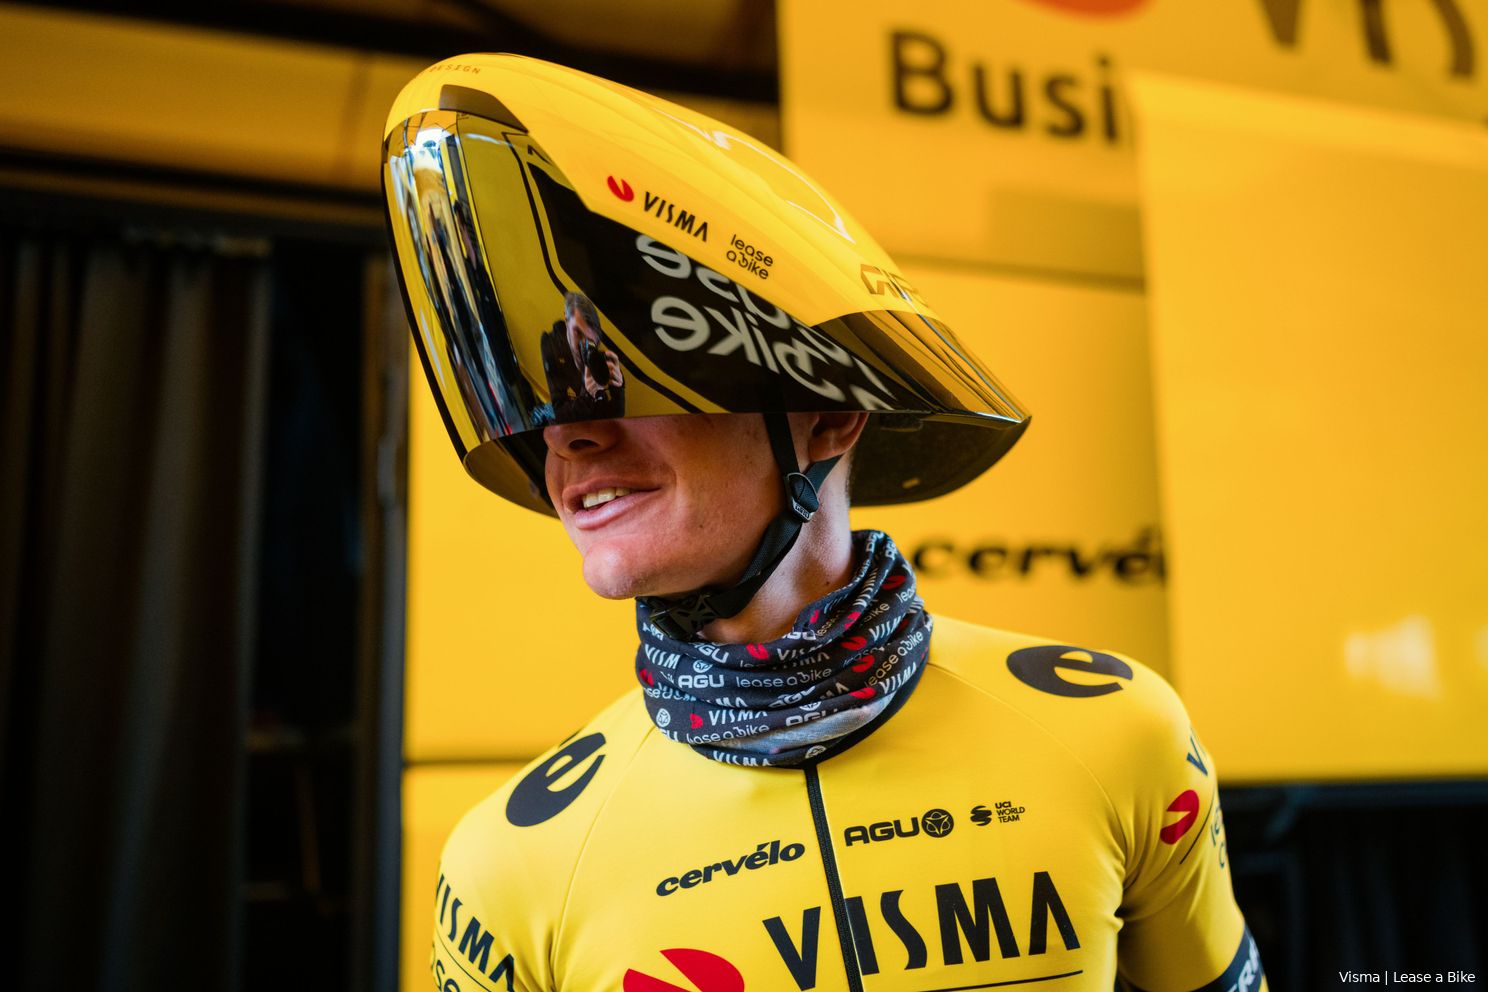 Aero position is crucial with new Visma | LAB time trial helmet: "I don't care how ridiculous I look, I feel super fast"